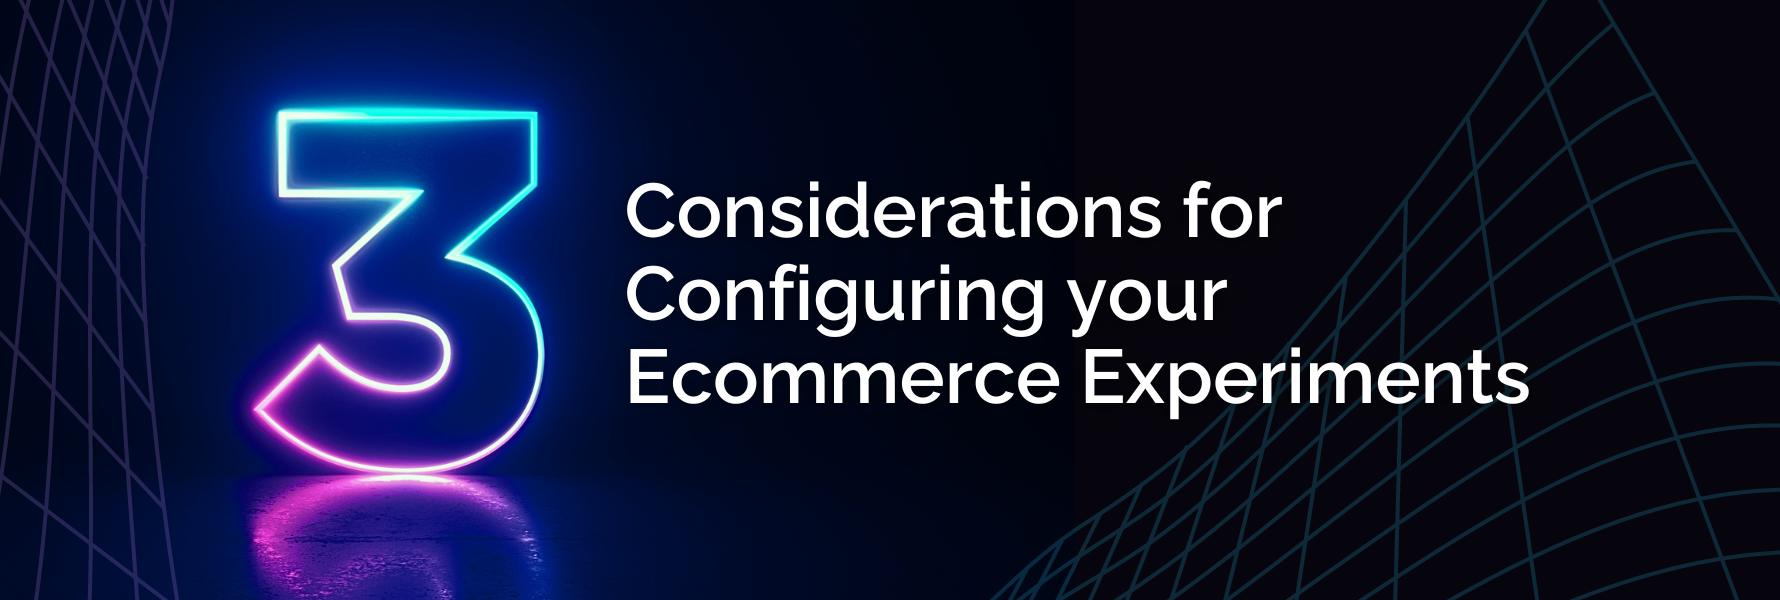 3 Considerations for Configuring your Ecommerce Experiments